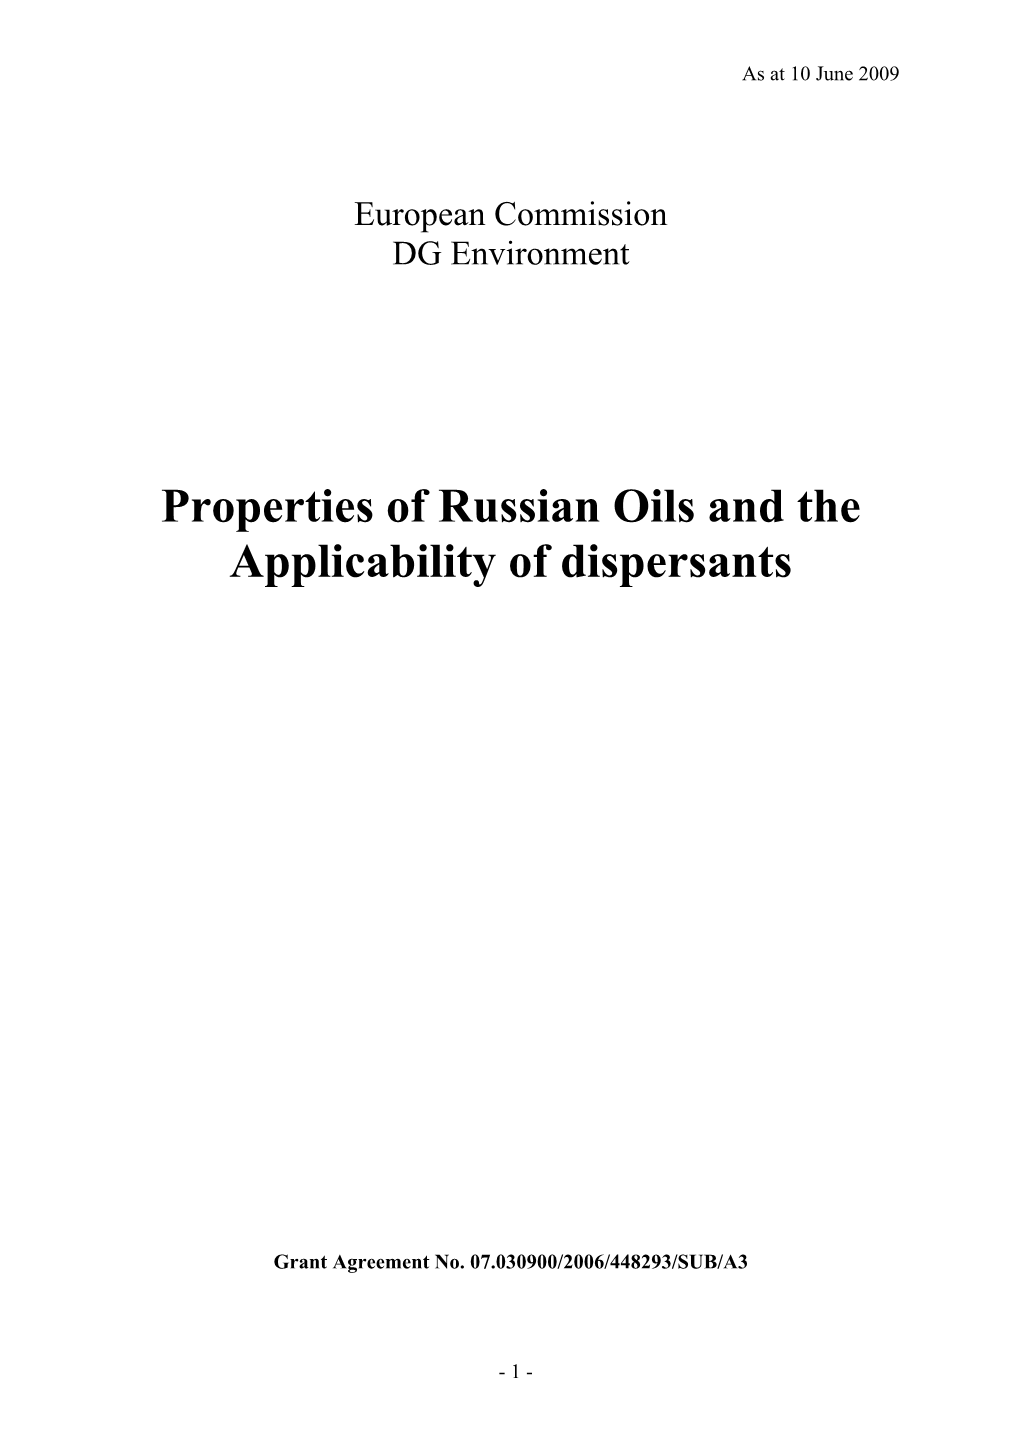 Properties of Russian Oils and the Applicability of Dispersants